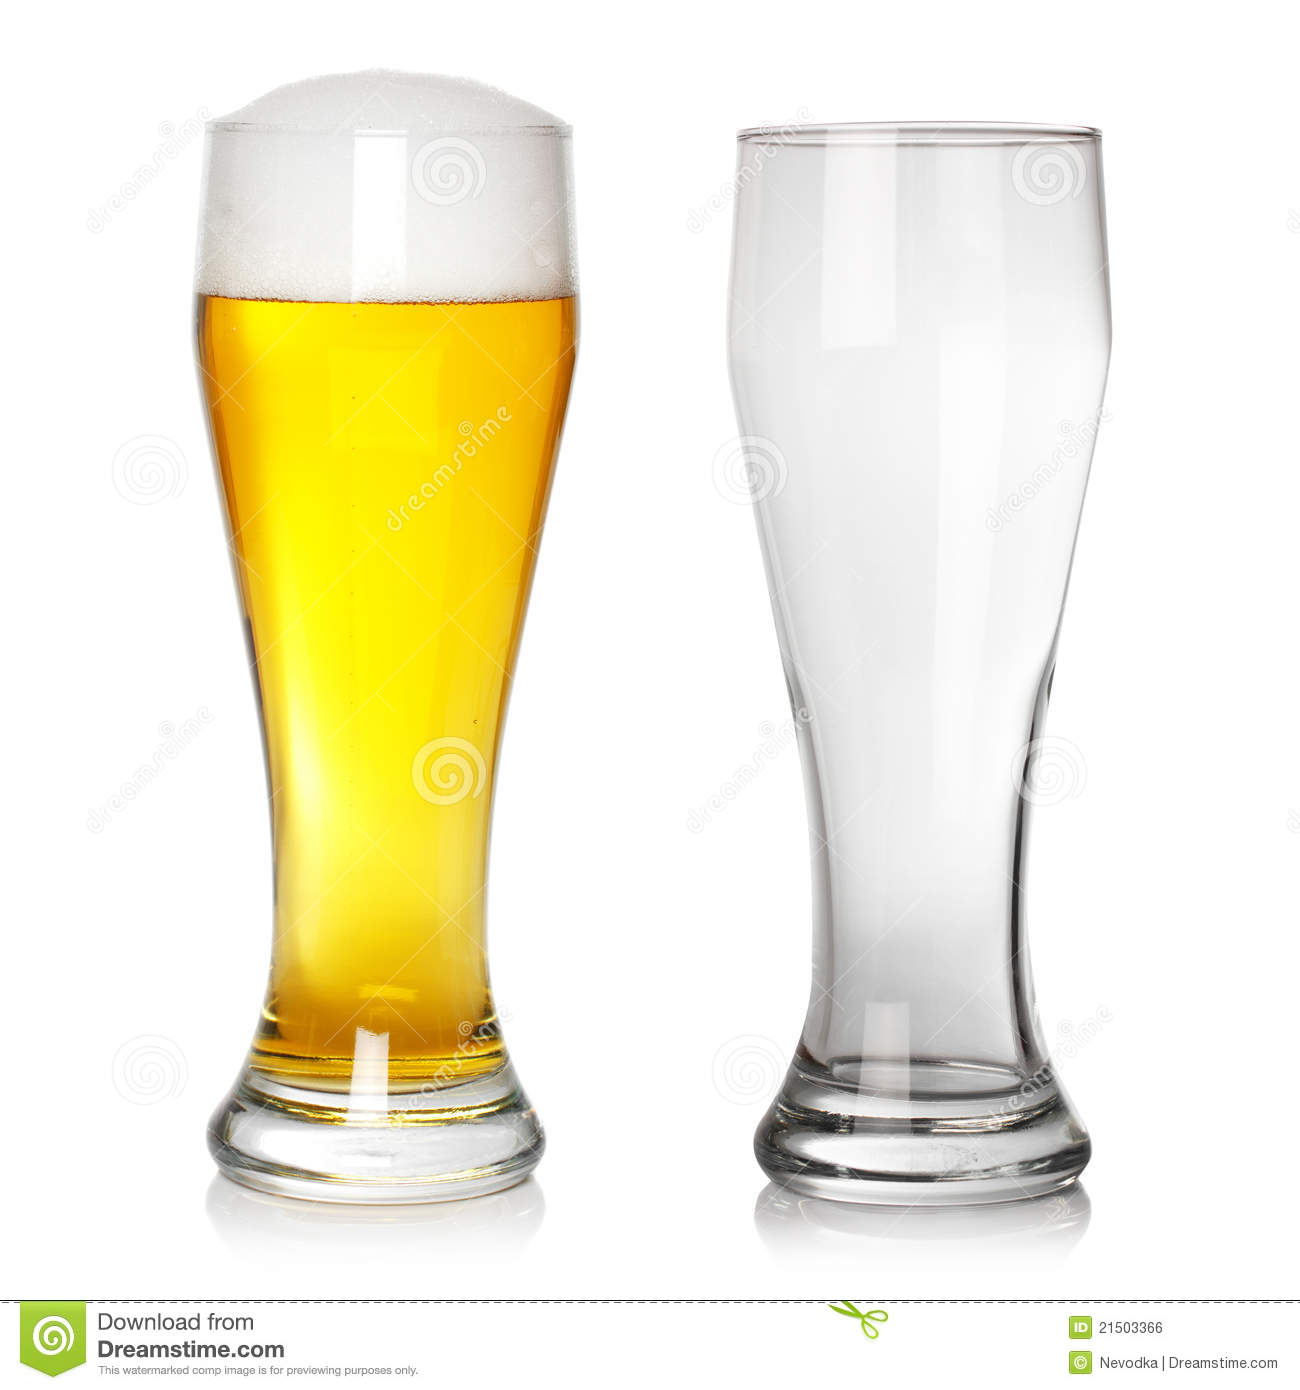 Full And Empty Beer Glass Royalty Free Stock Image   Image  21503366